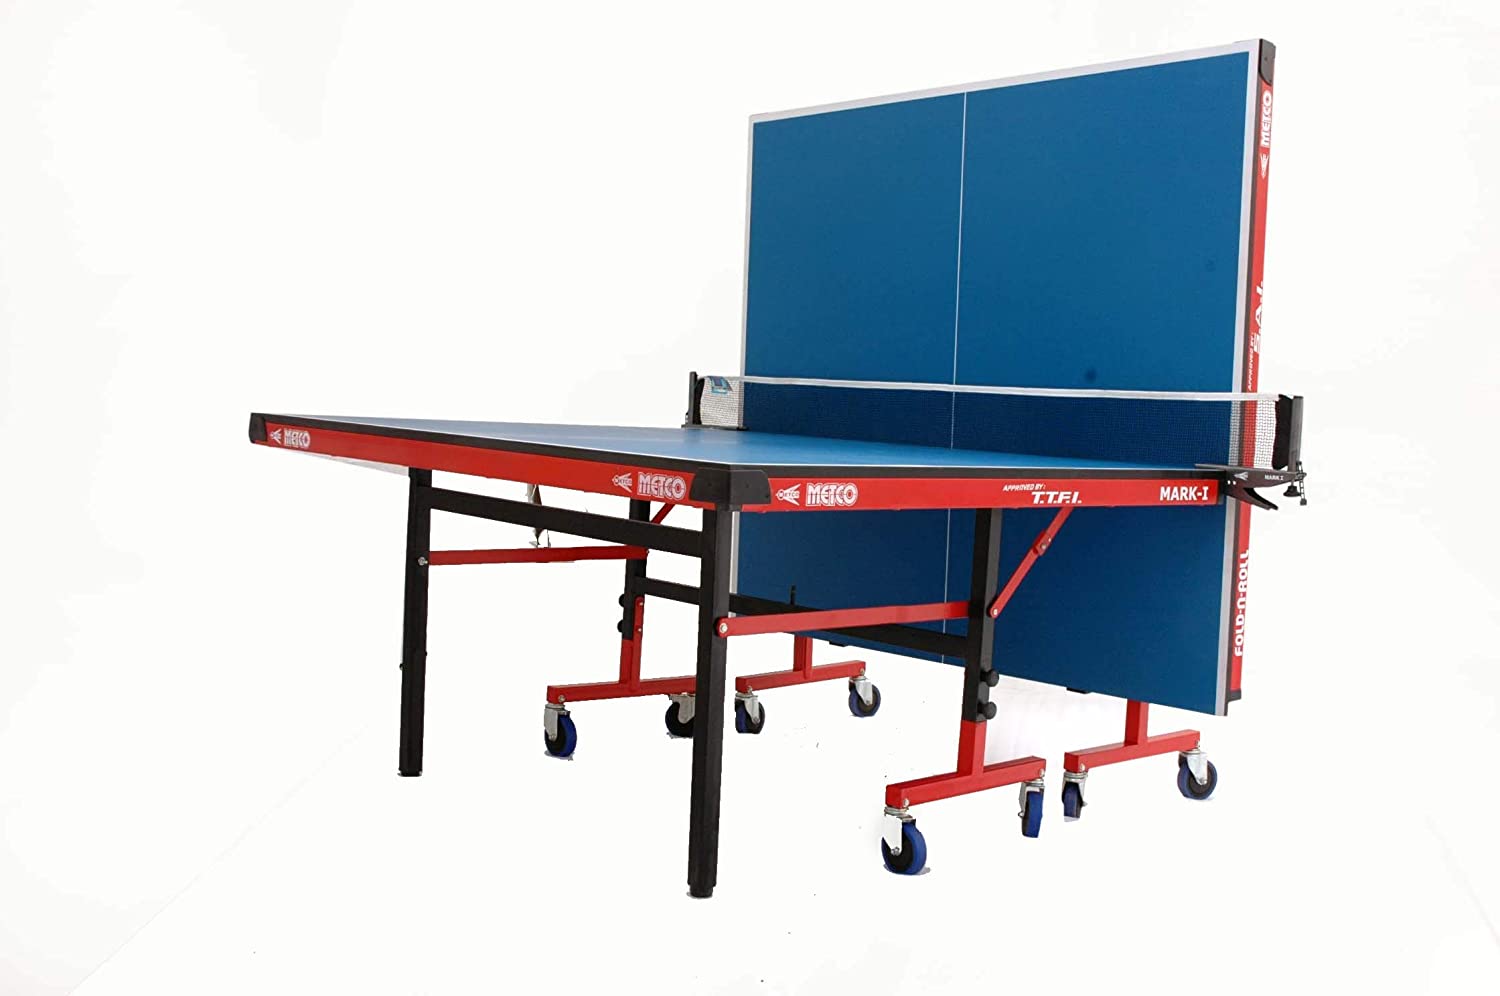 KTR Metco Super Deluxe Table Tennis Table Shakti Sports and Fitness Pune